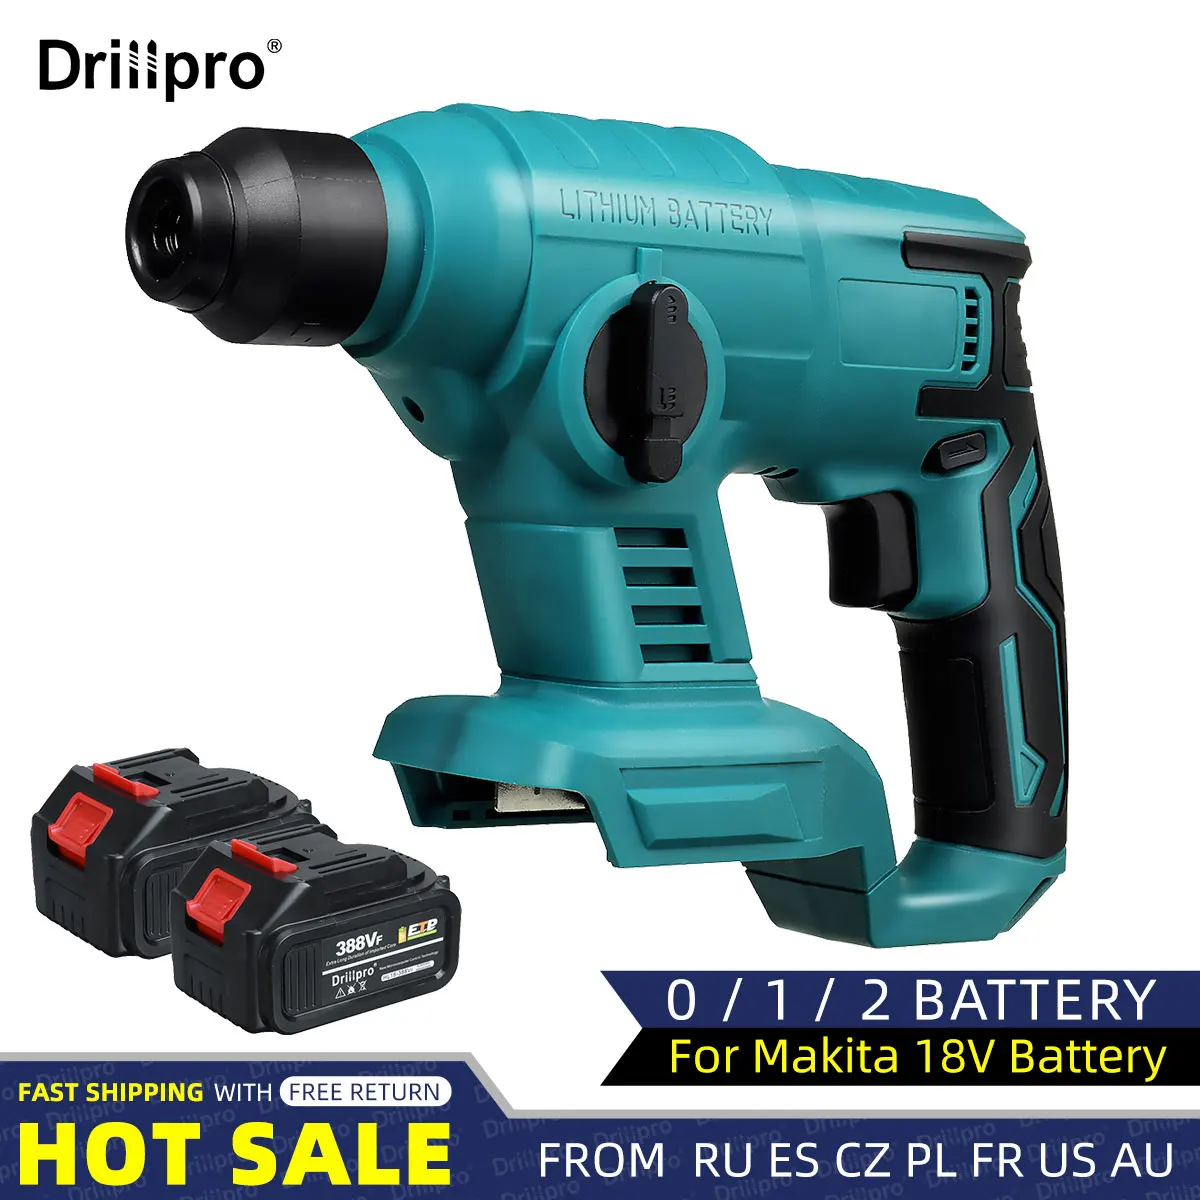 

Drillpro 388Vf Rechargeable Electric Rotary Hammer Cordless Multifunction Hammer Impact Drill Power Tool for Makita 18V Battery